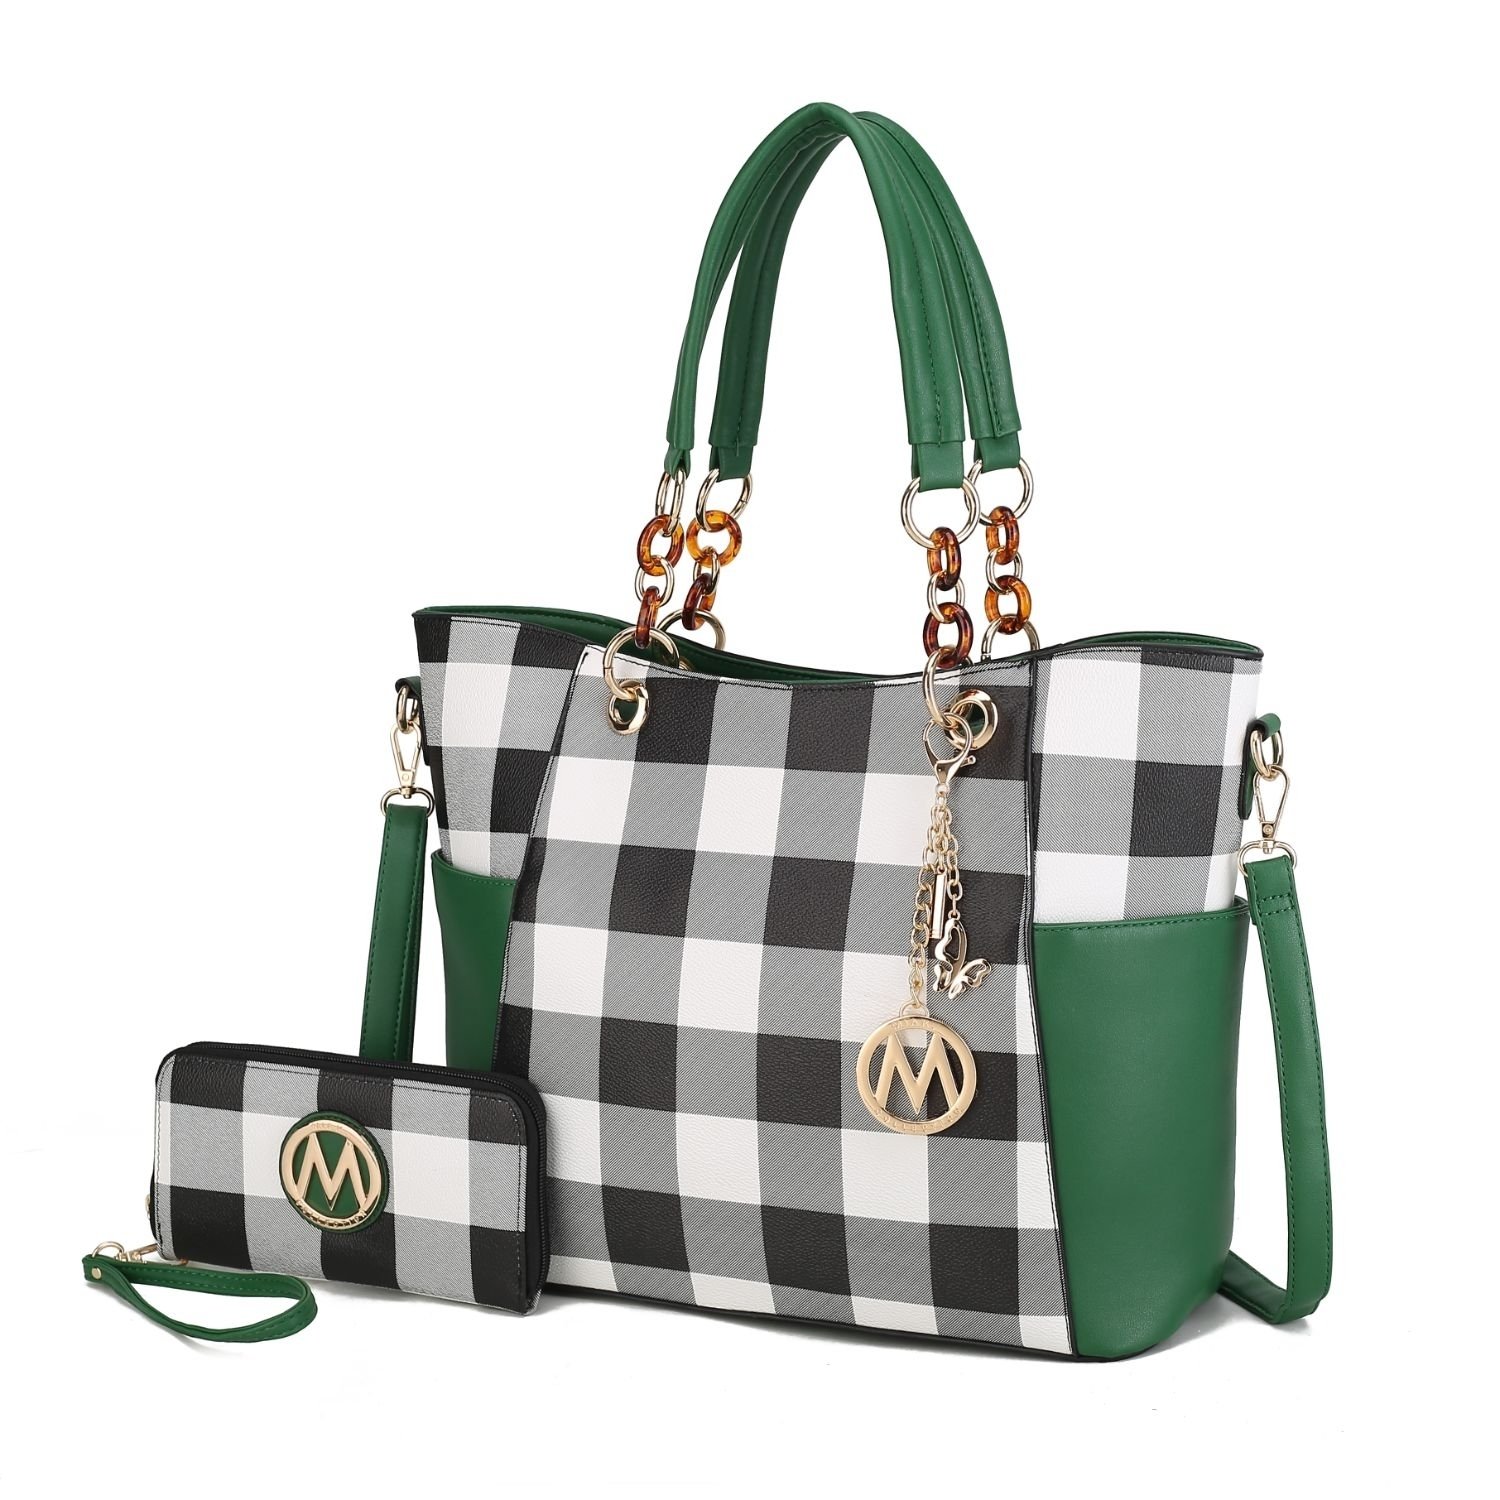 Bonita Checkered Tote 2 Pcs Wome's Large Handbag With Wallet And Decorative M Keychain By Mia K. - Cognac Brown